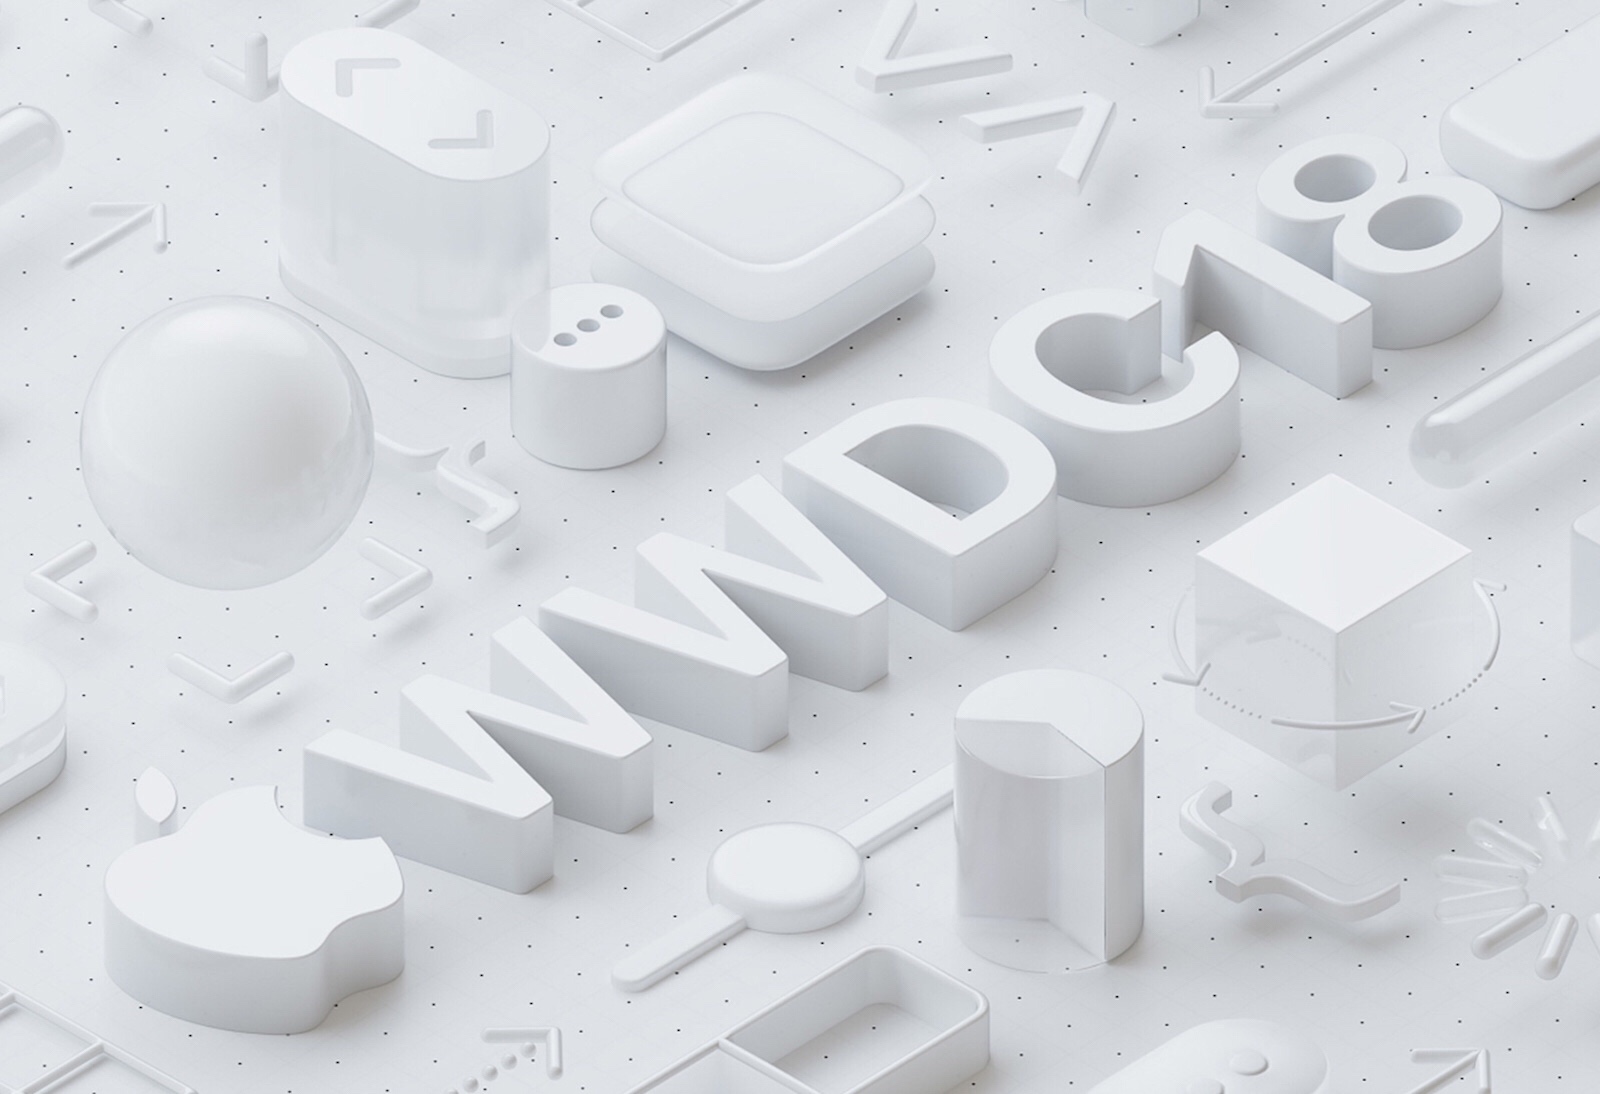 Apple’s WWDC 2018 event will start on June 4th